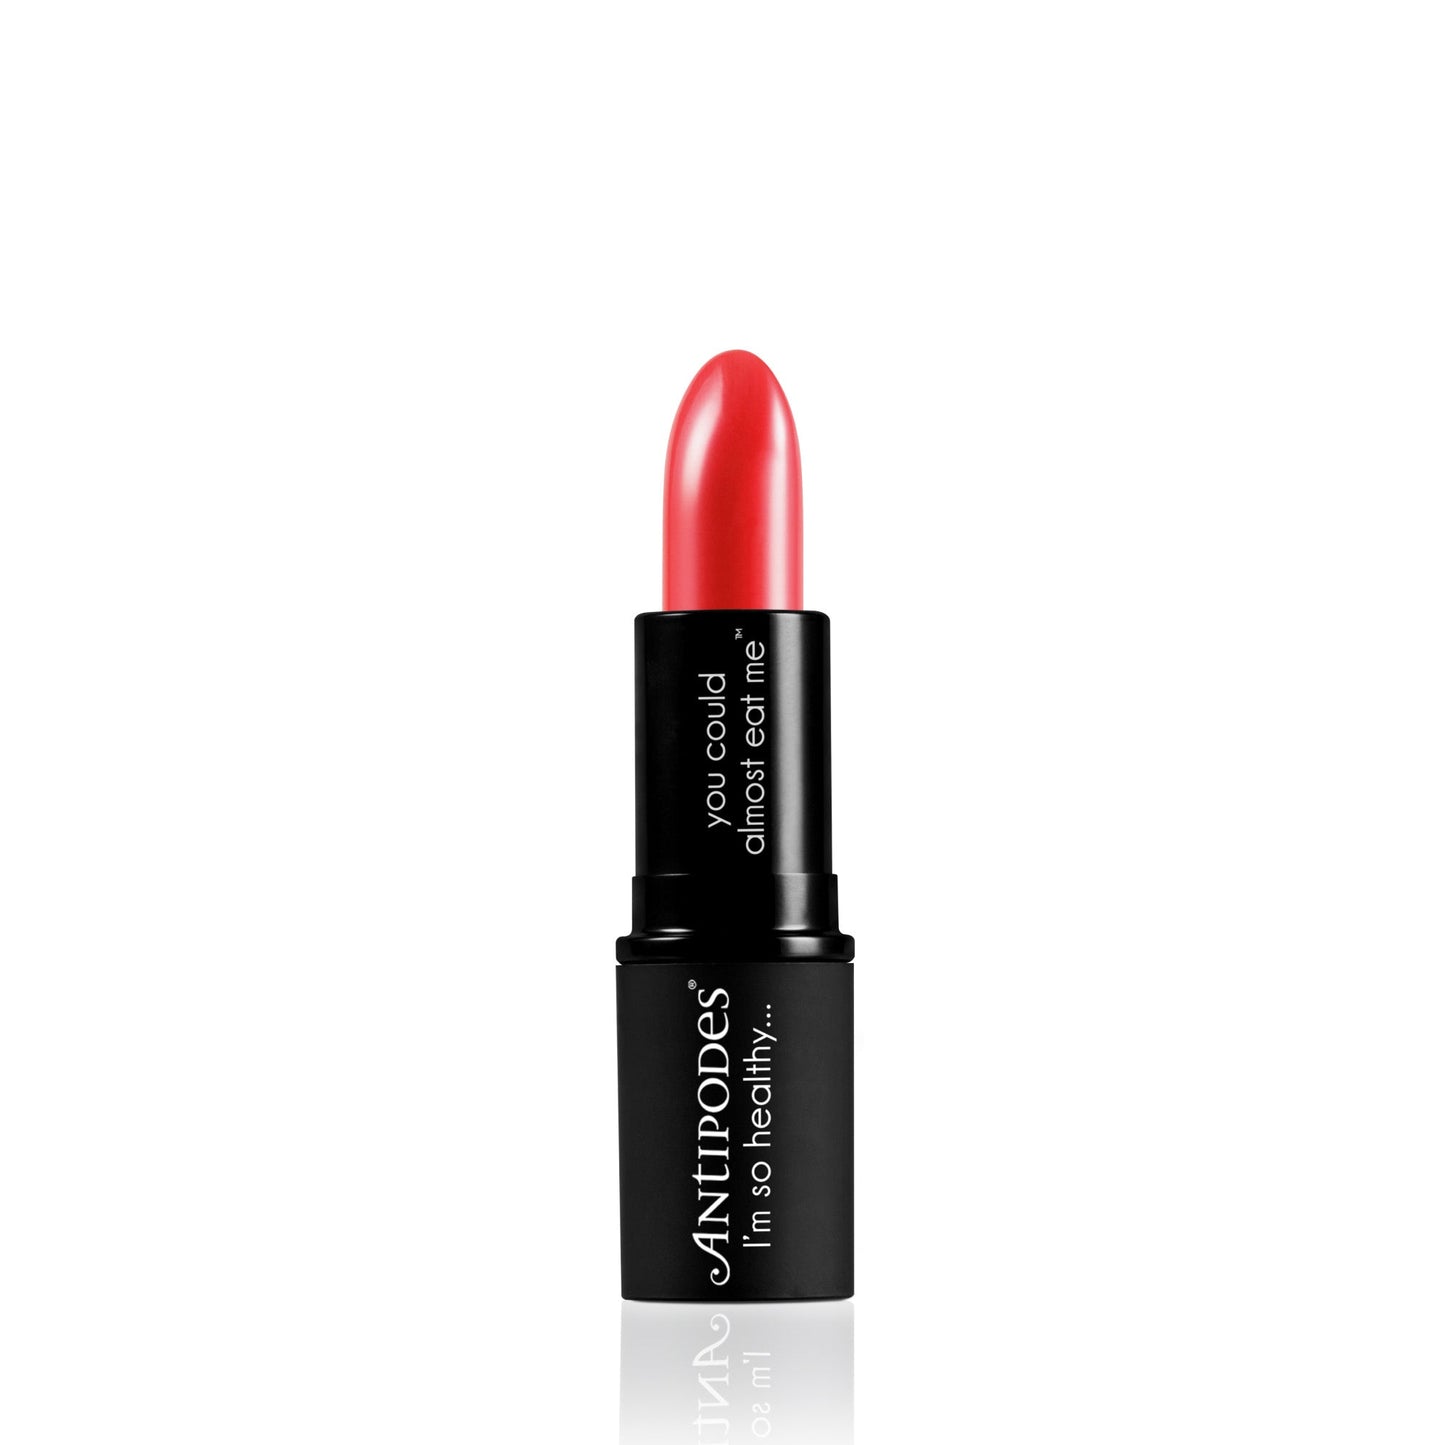 South Pacific Coral Moisture-Boost Natural Lipstick 4g - Antipodes New Zealand